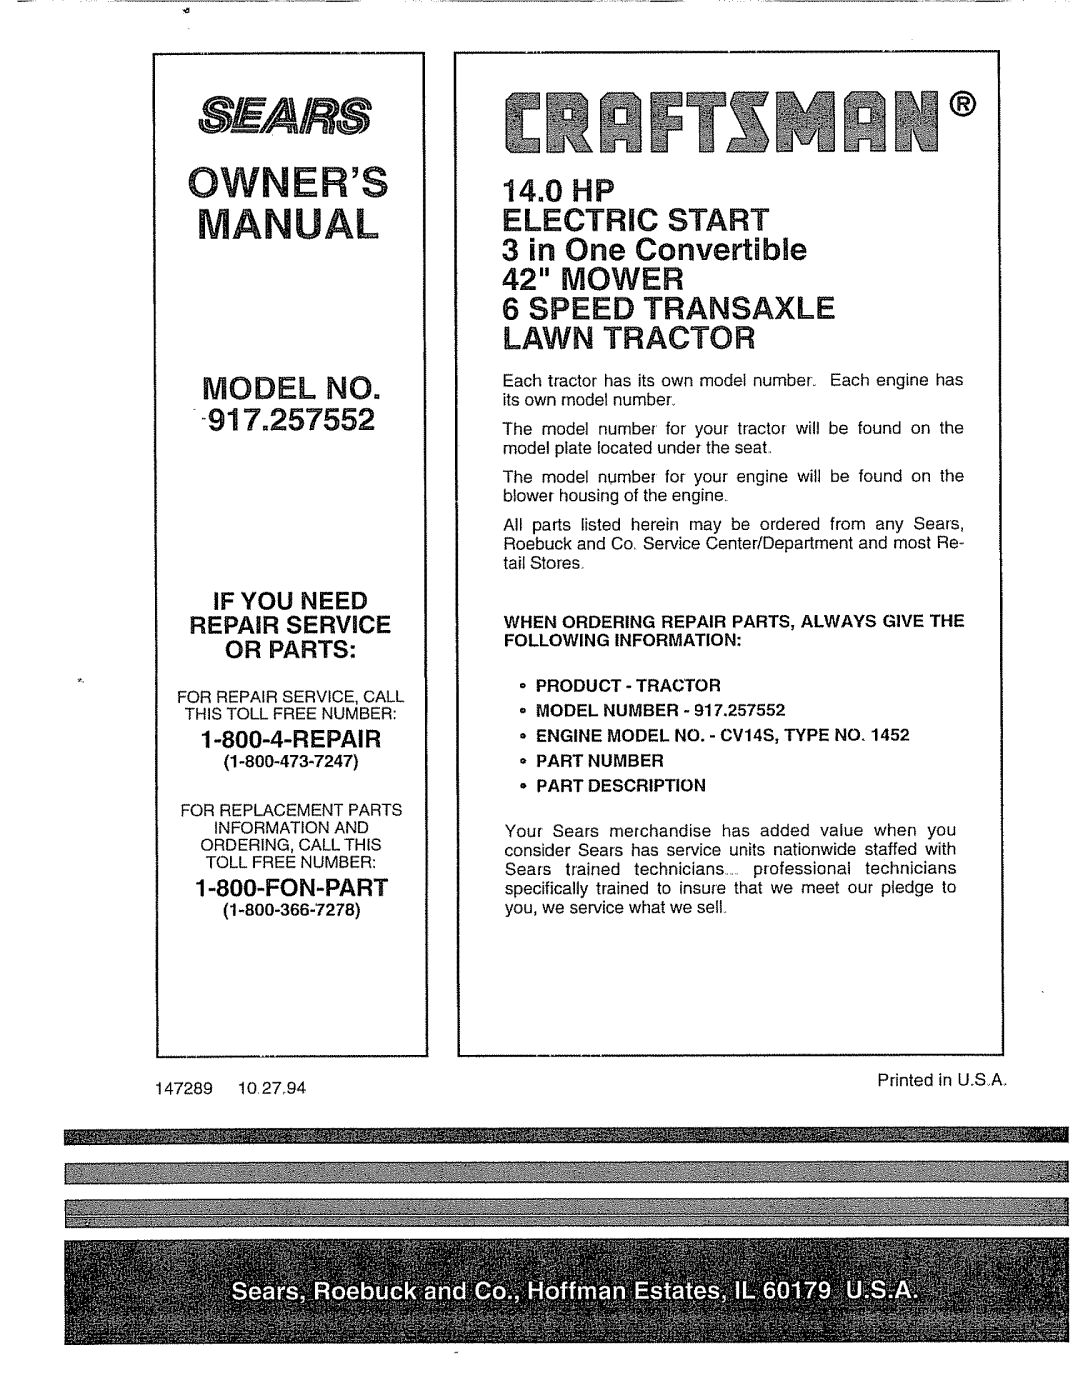 Sears 917.257552 Owners Anual, MODEL NO. 917o257552, If You Need Repair Service Or Parts, Fon-Part, o PART DESCRIPTION 